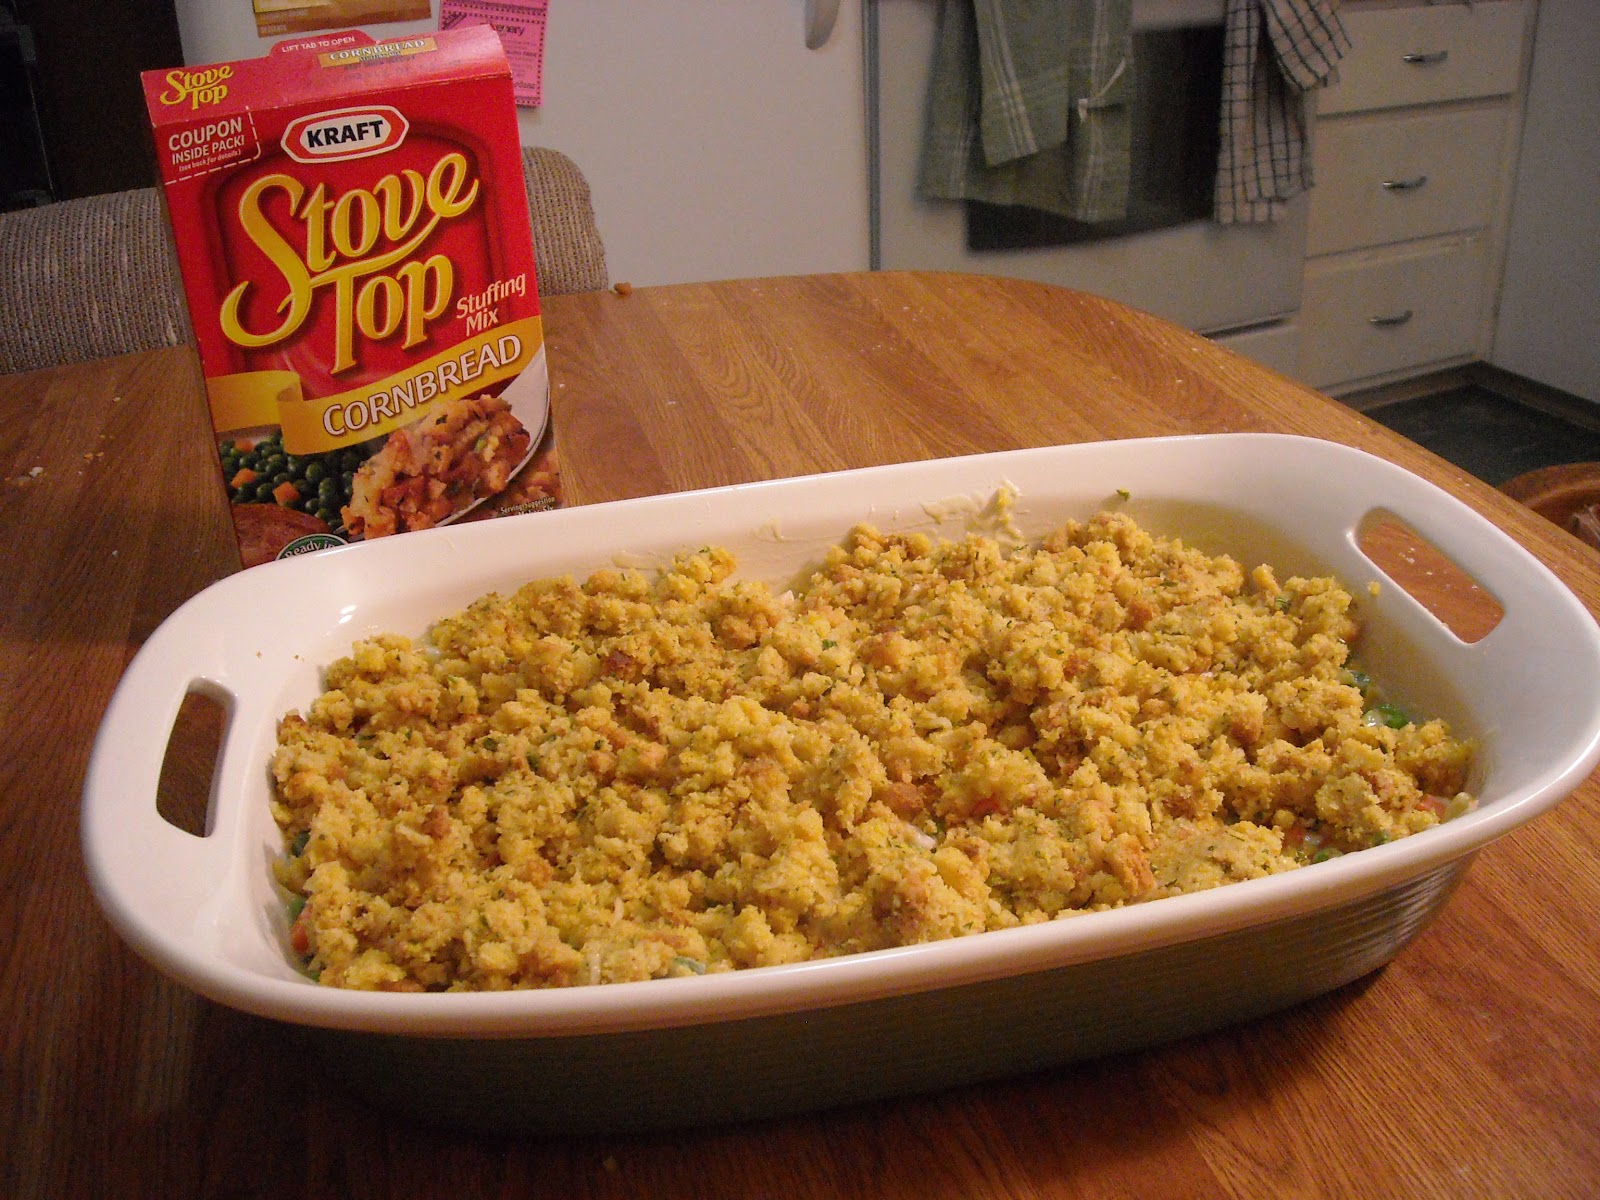 recipe on back: Stove Top Stuffing Easy Chicken Bake